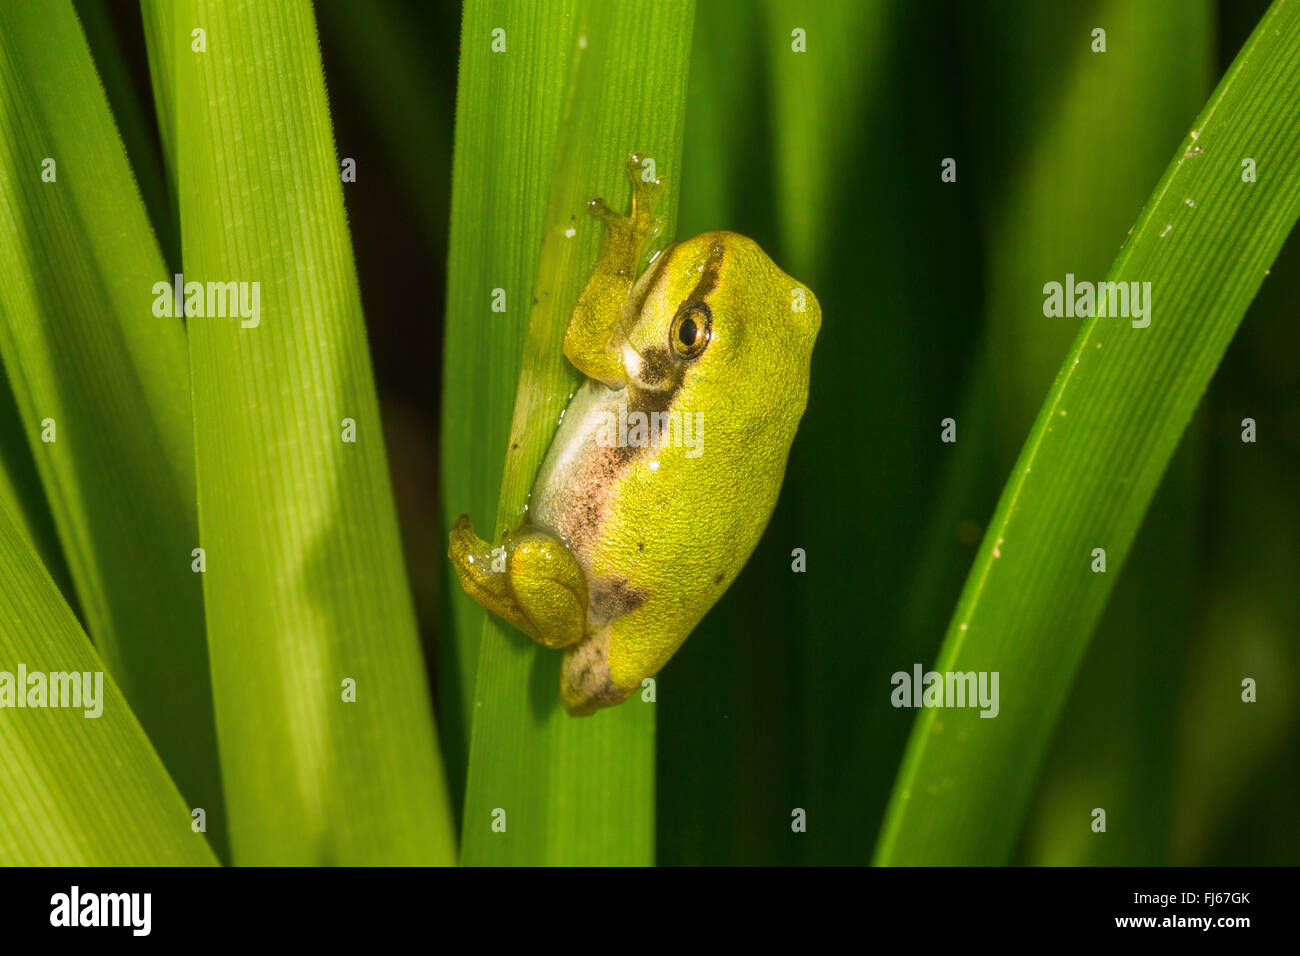 European treefrog, common treefrog, Central European treefrog (Hyla arborea), young animal just before the end of the metamorphosis at a stem, Germany, Bavaria Stock Photo